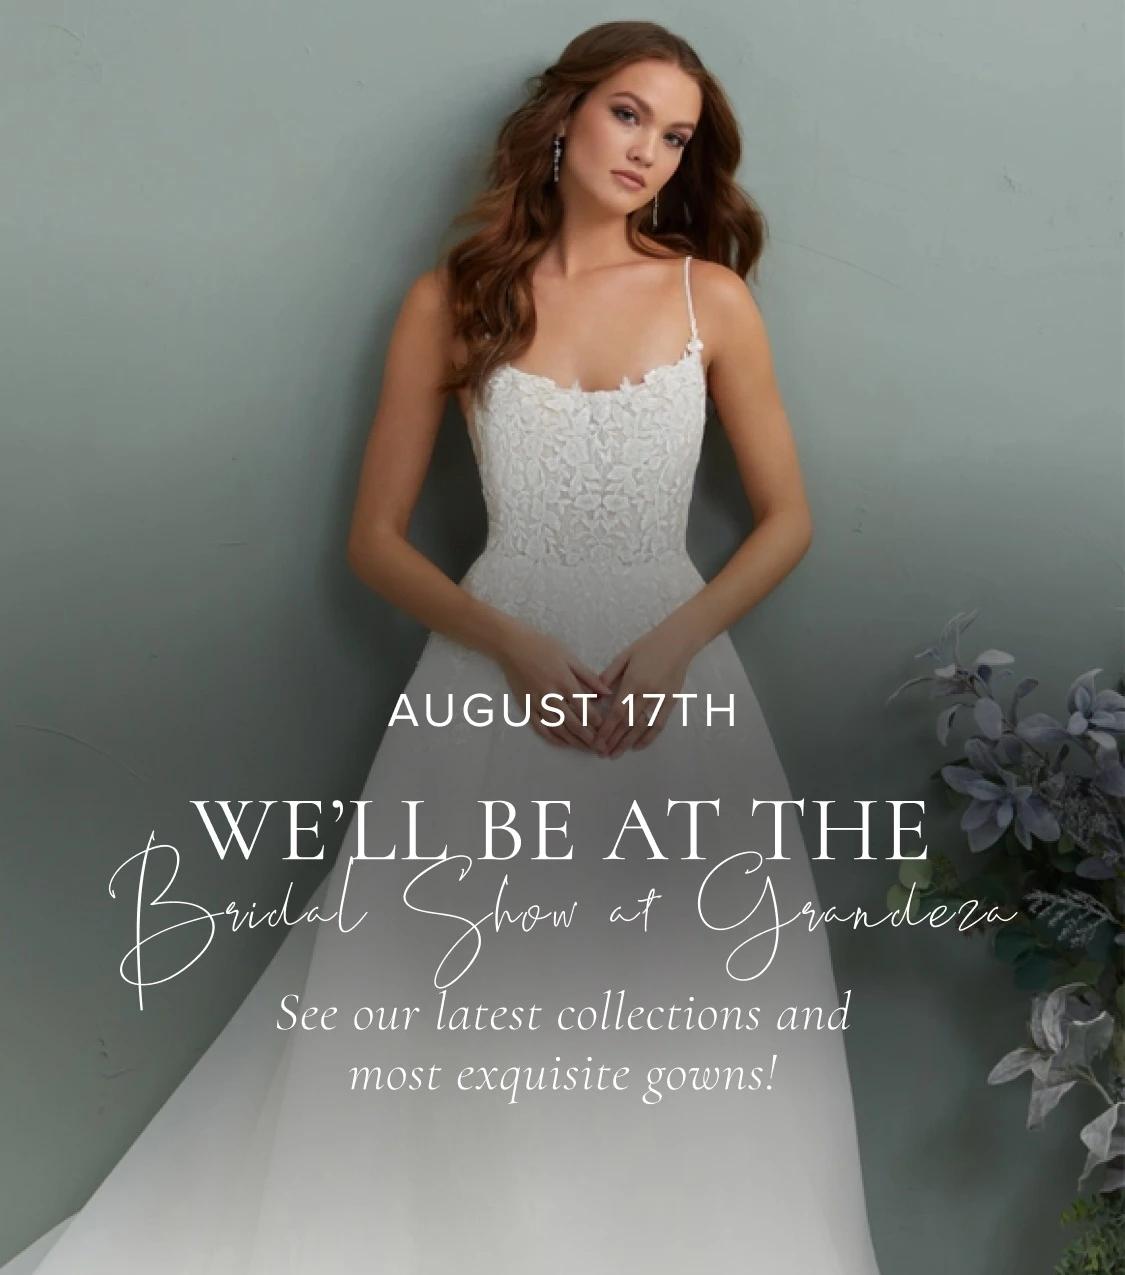 Wedding Date is too close? Banner for mobile